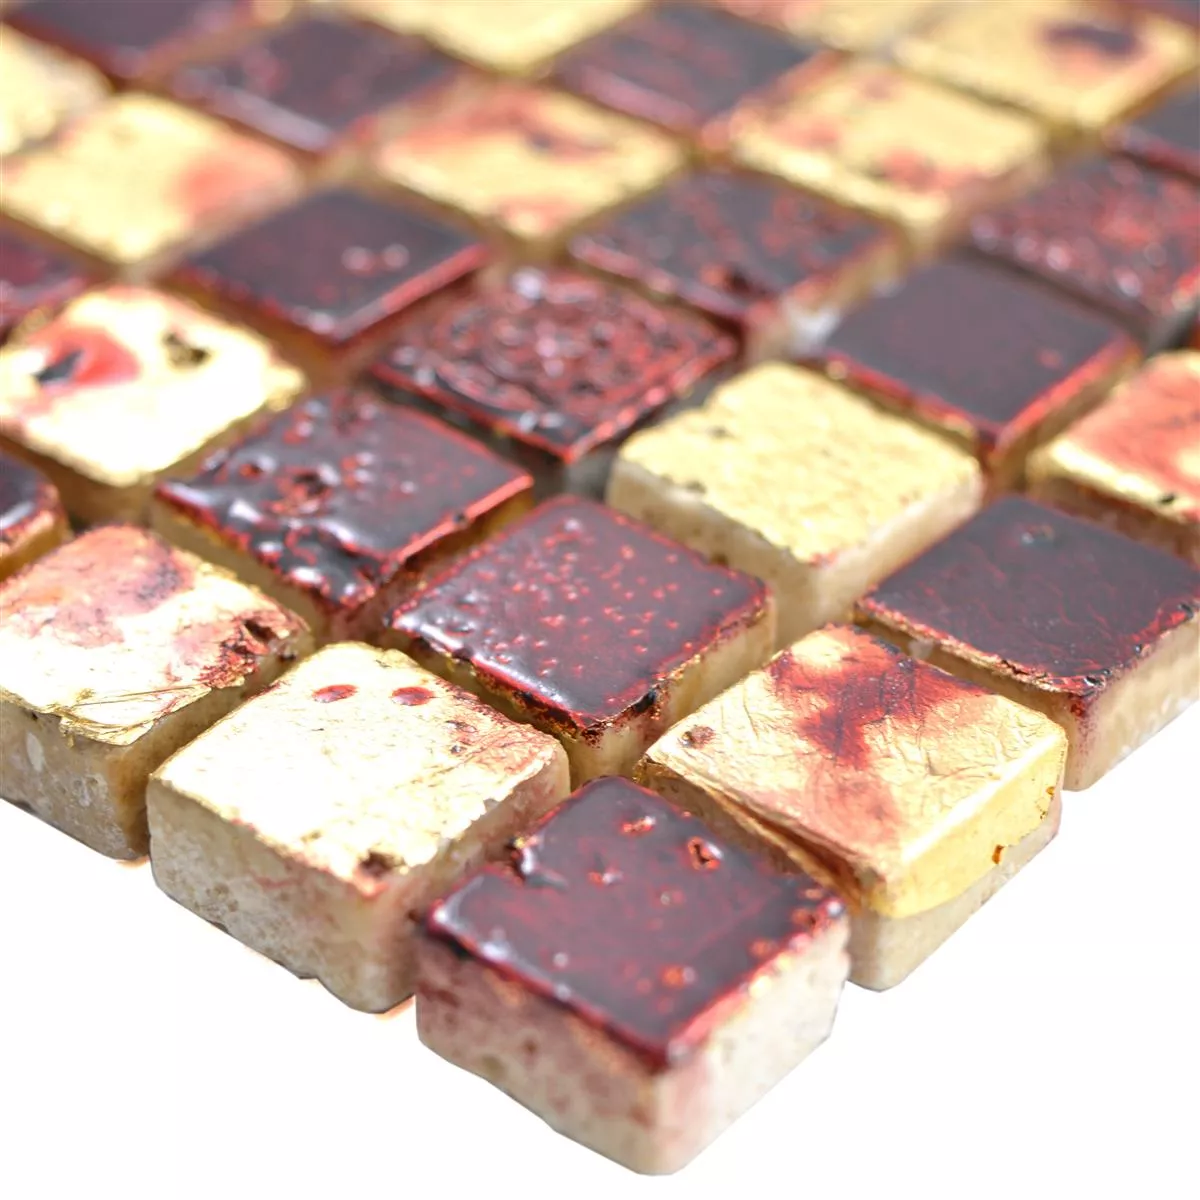 Natural Stone Resin Mosaic Tiles Lucky Gold Red